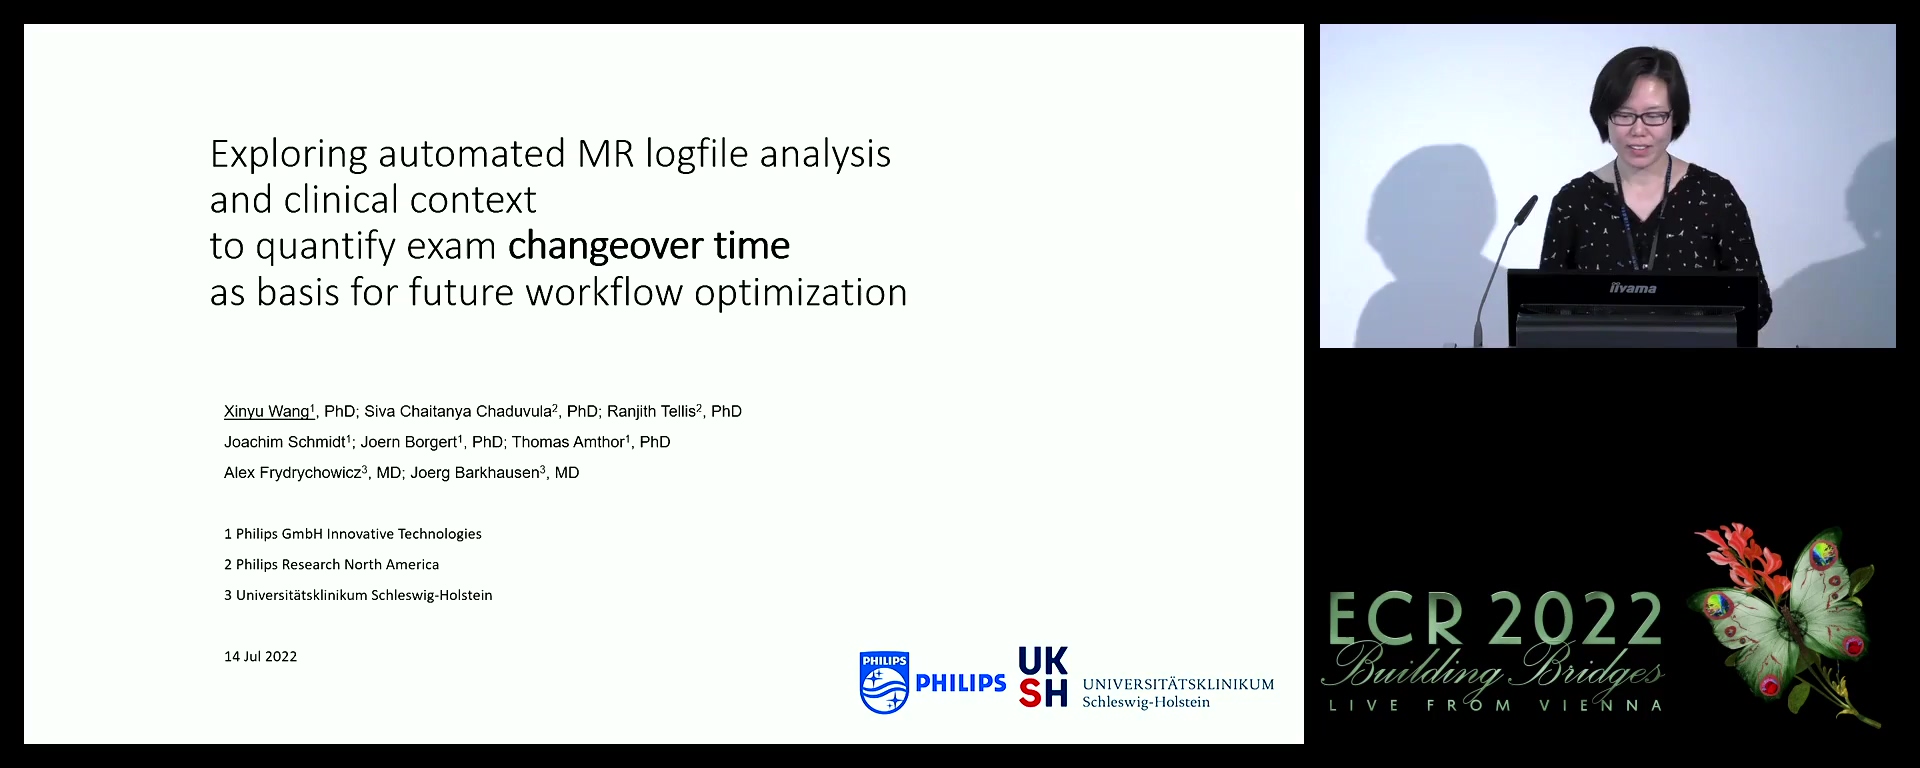 Exploring automated MR logfile analysis and clinical context to quantify exam changeover time as basis for future workflow optimisation